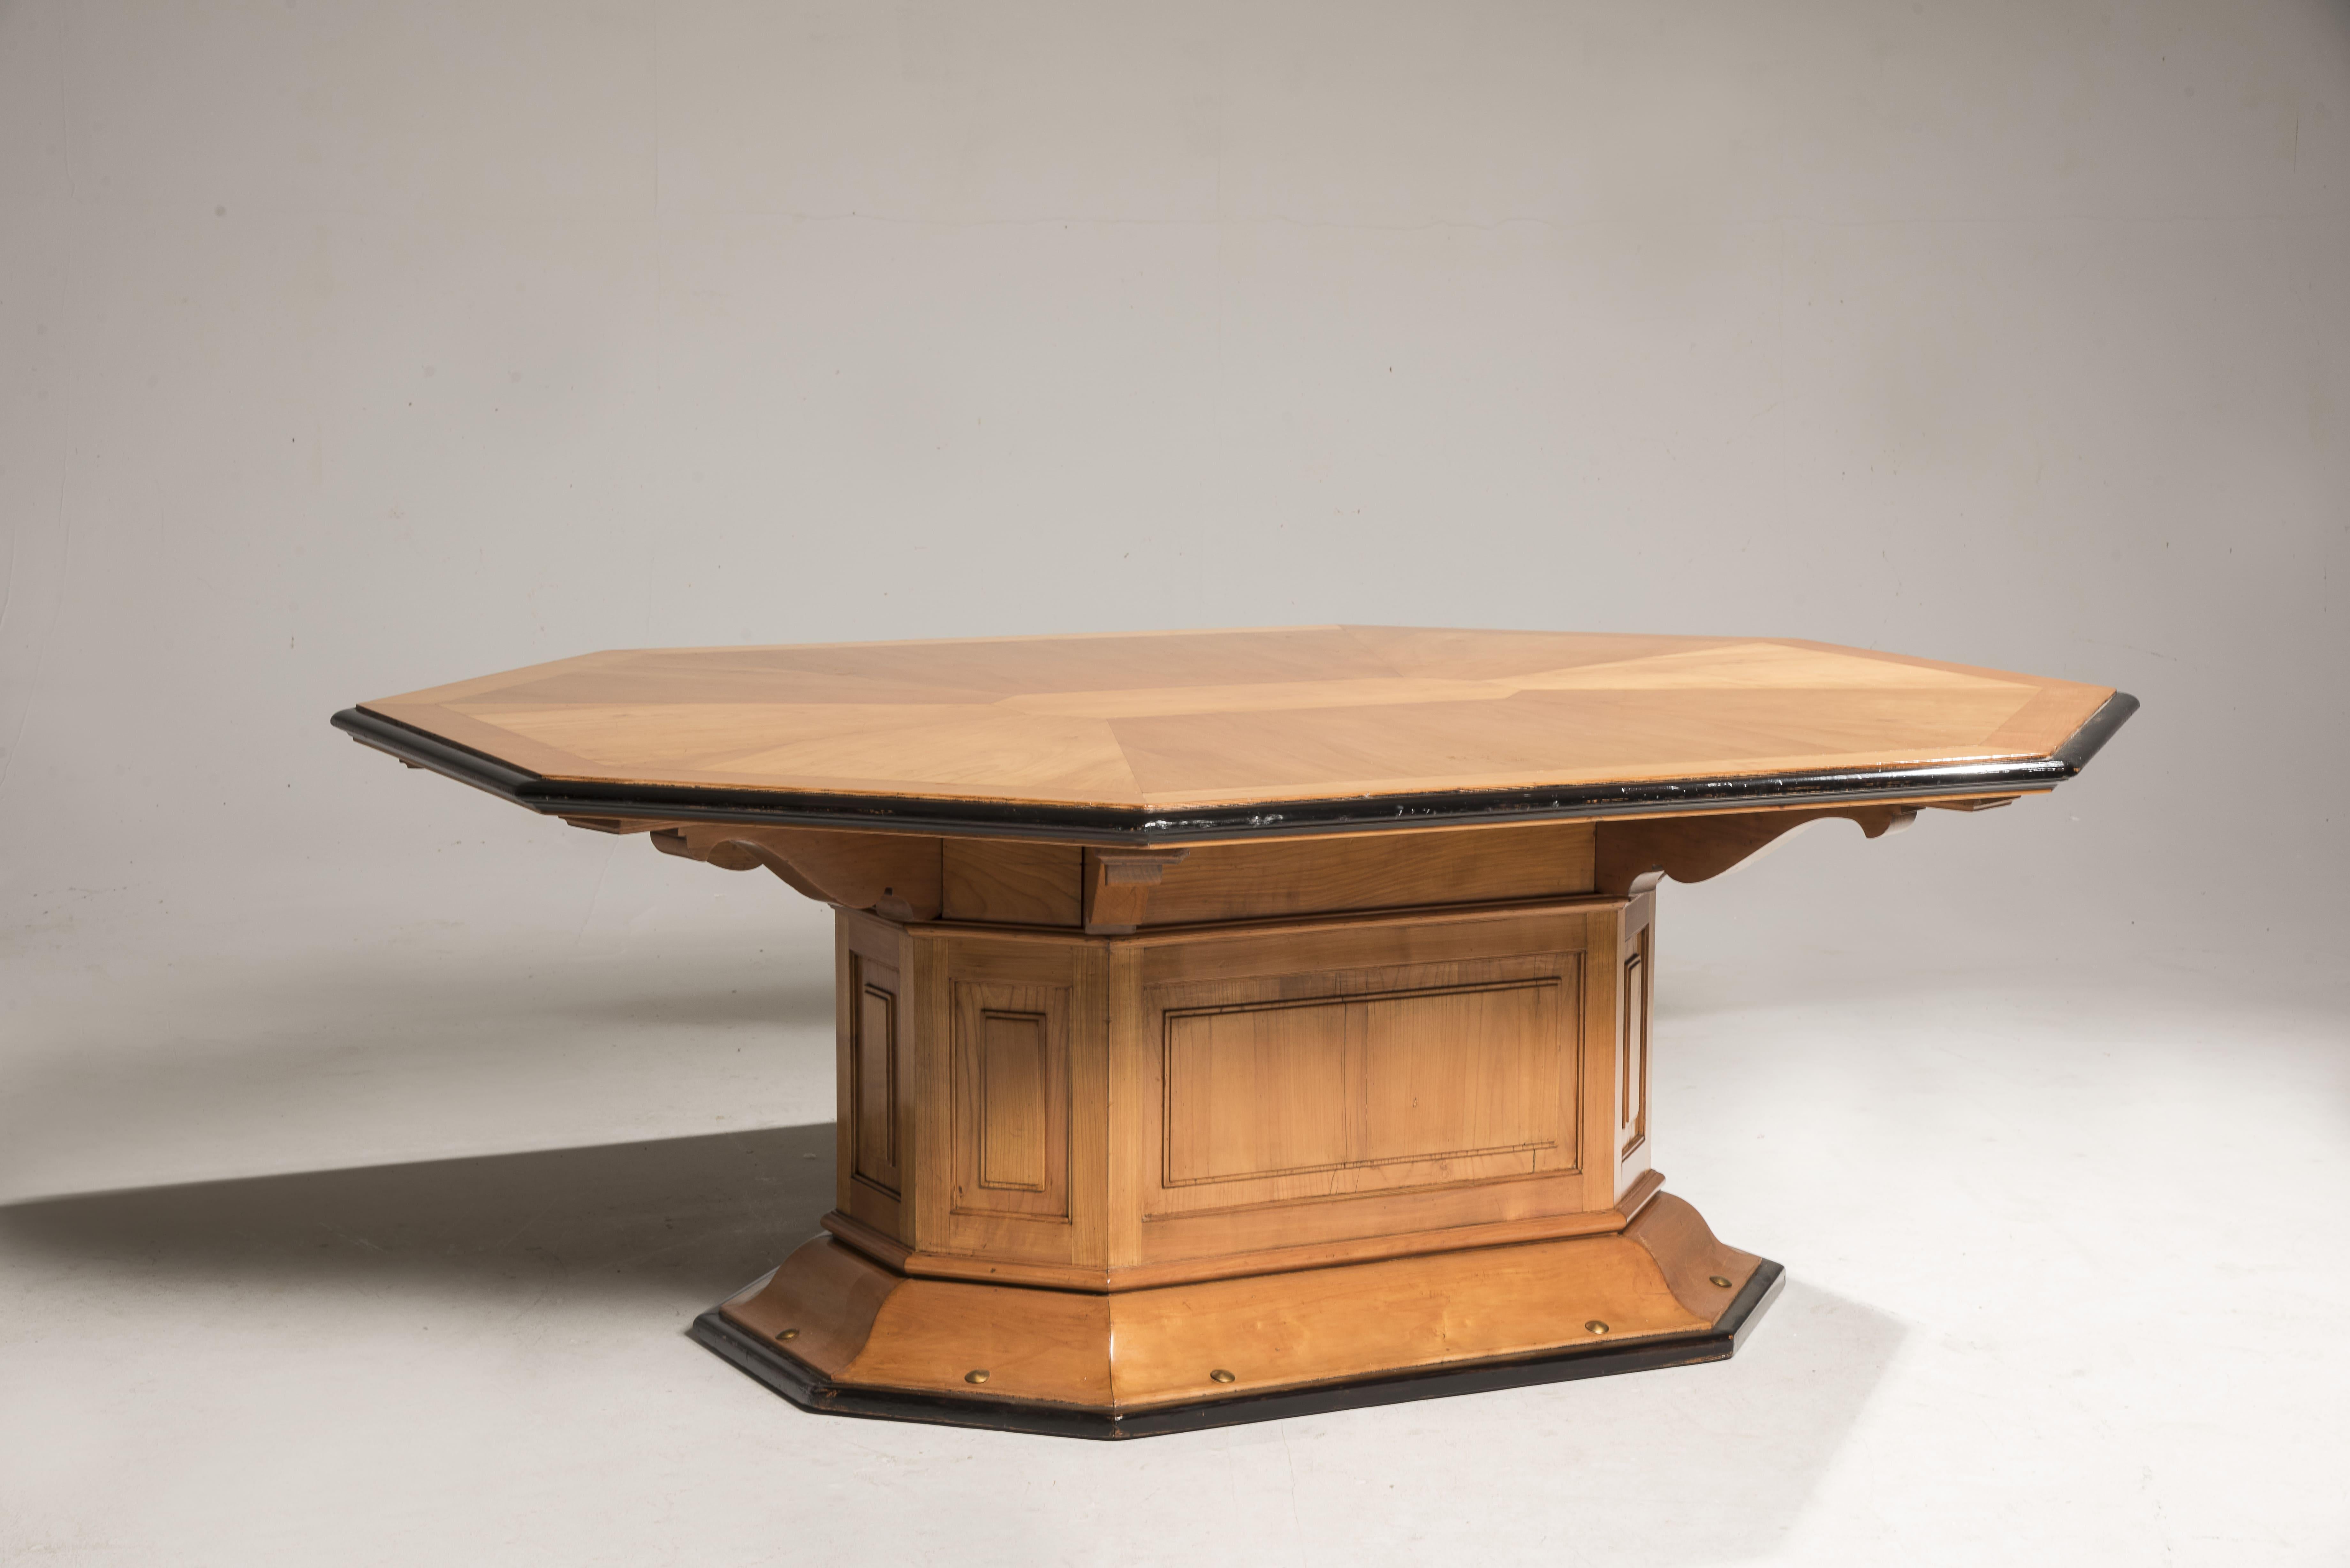 Italian Art Deco Octagonal Cherrywood Table with Black Borders and Brass Details For Sale